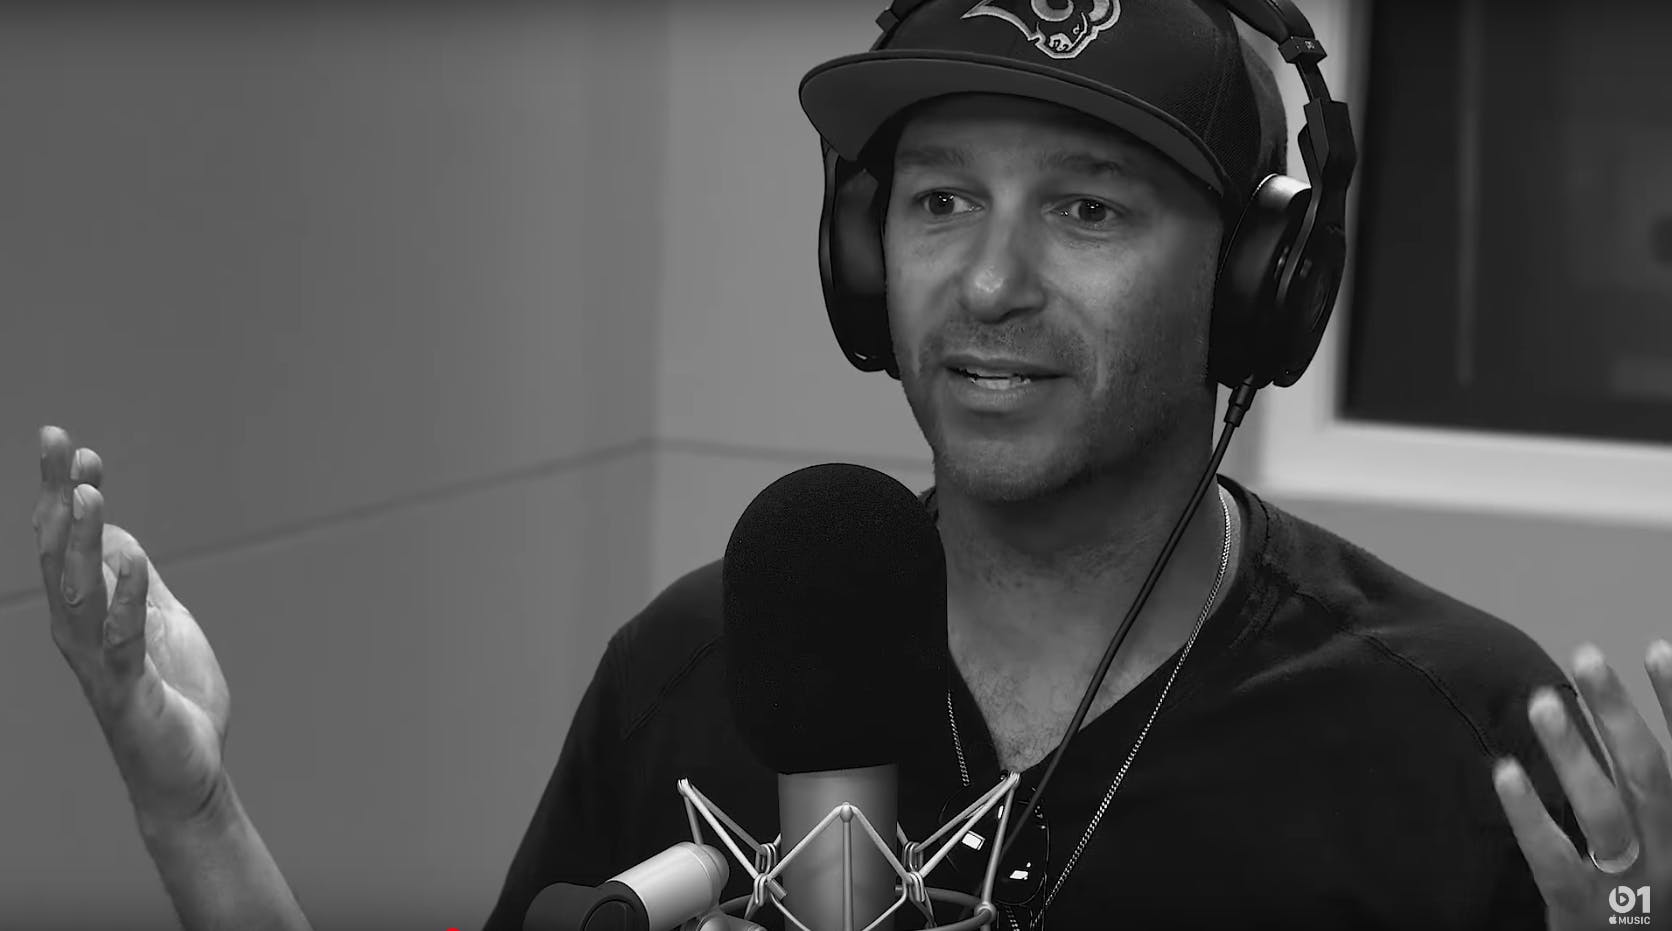 Tom Morello Tells Lars Ulrich Why Rage Against The Machine Broke Up